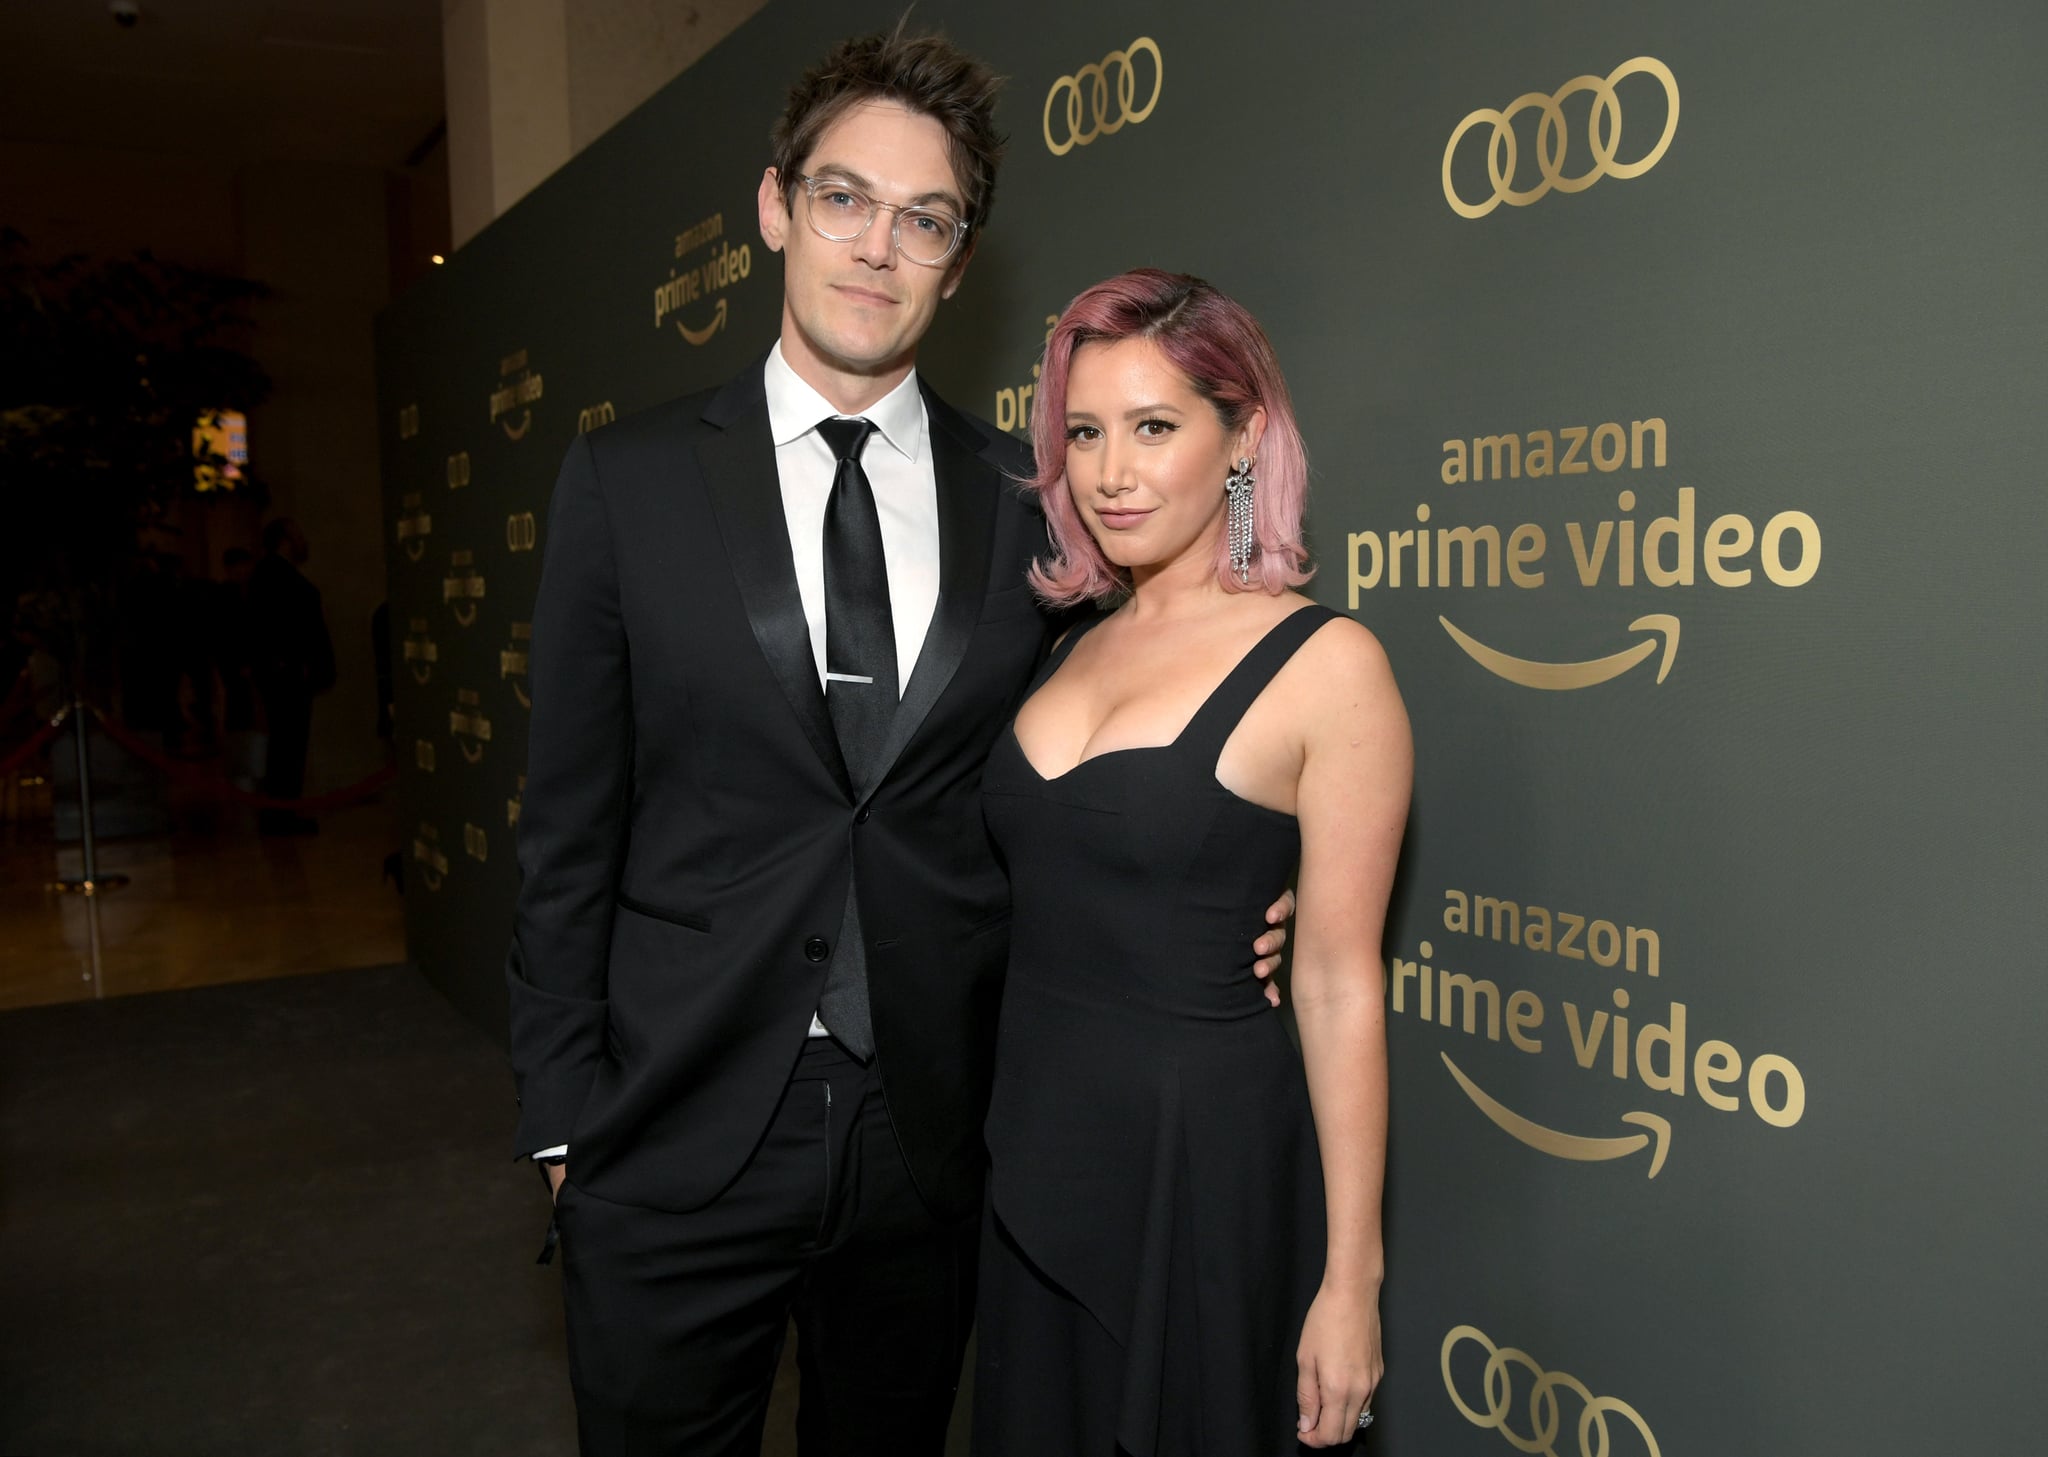 BEVERLY HILLS, CA - JANUARY 06:  Christopher French and Ashley Tisdale attend the Amazon Prime Video's Golden Globe Awards After Party at The Beverly Hilton Hotel on January 6, 2019 in Beverly Hills, California.  (Photo by Emma McIntyre/Getty Images)